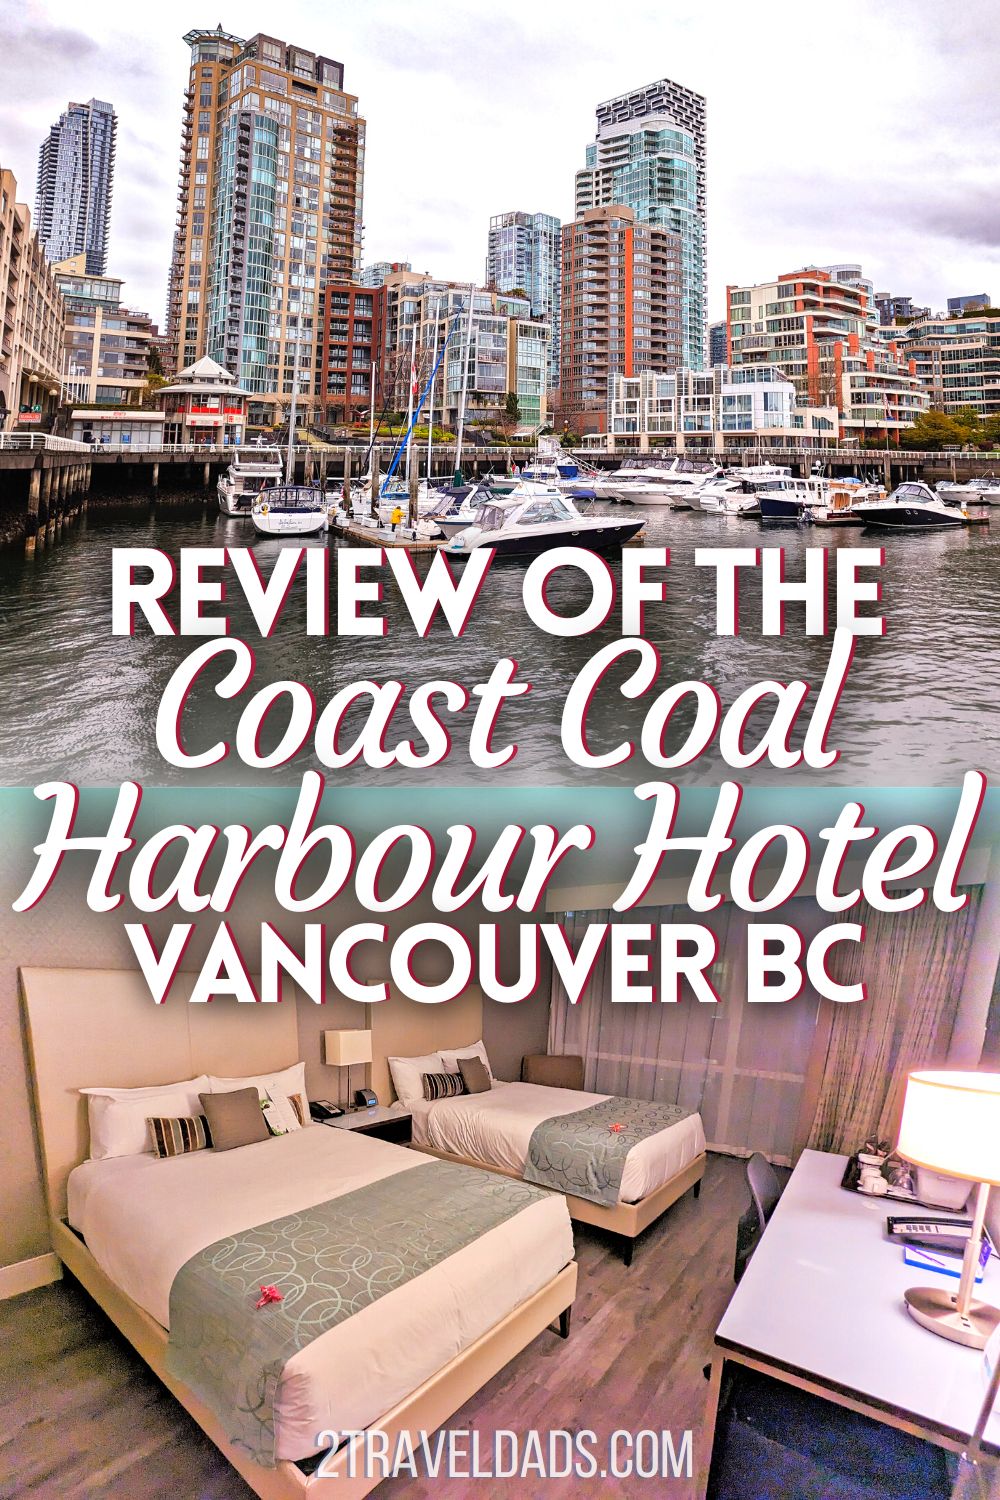 The Coast Coal Harbour Hotel in Vancouver BC may not seem like the top pick for a weekend trip, but between its location and amenities, you'll see why it's our go-to for low key, fun trips to Vancouver. Details on hotel accommodations and things to do near the Coast Coal Harbour Hotel.